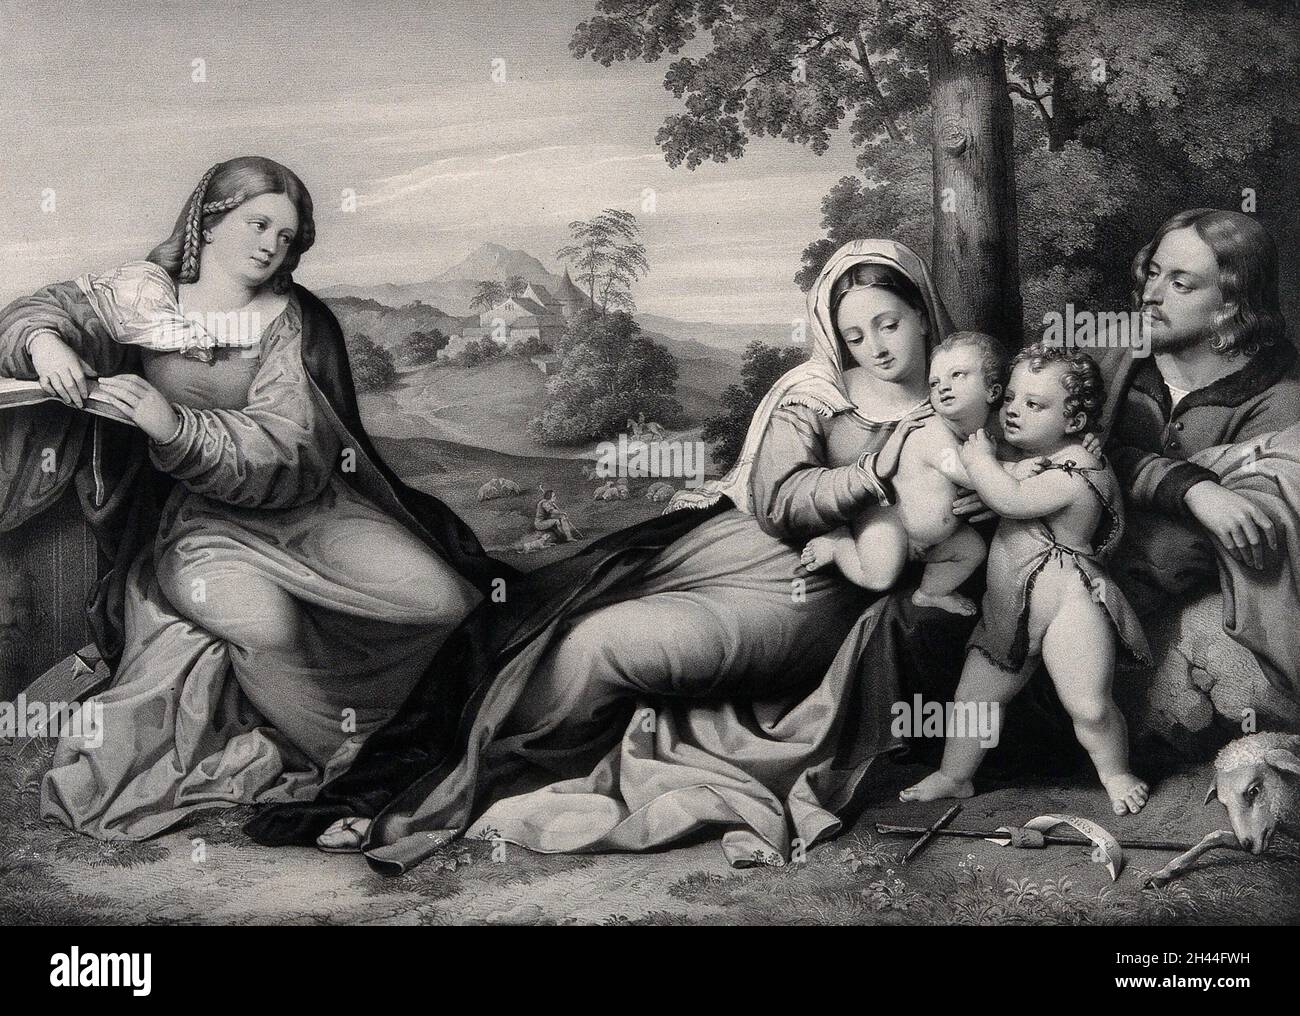 Saint Mary (the Blessed Virgin) with the Christ Child, Saint Catherine of Alexandria, Saint John the Baptist and Saint Joseph. Lithograph by G. Markendorf after F.S. Hanfstaengl after J. Palma, il Vecchio. Stock Photo